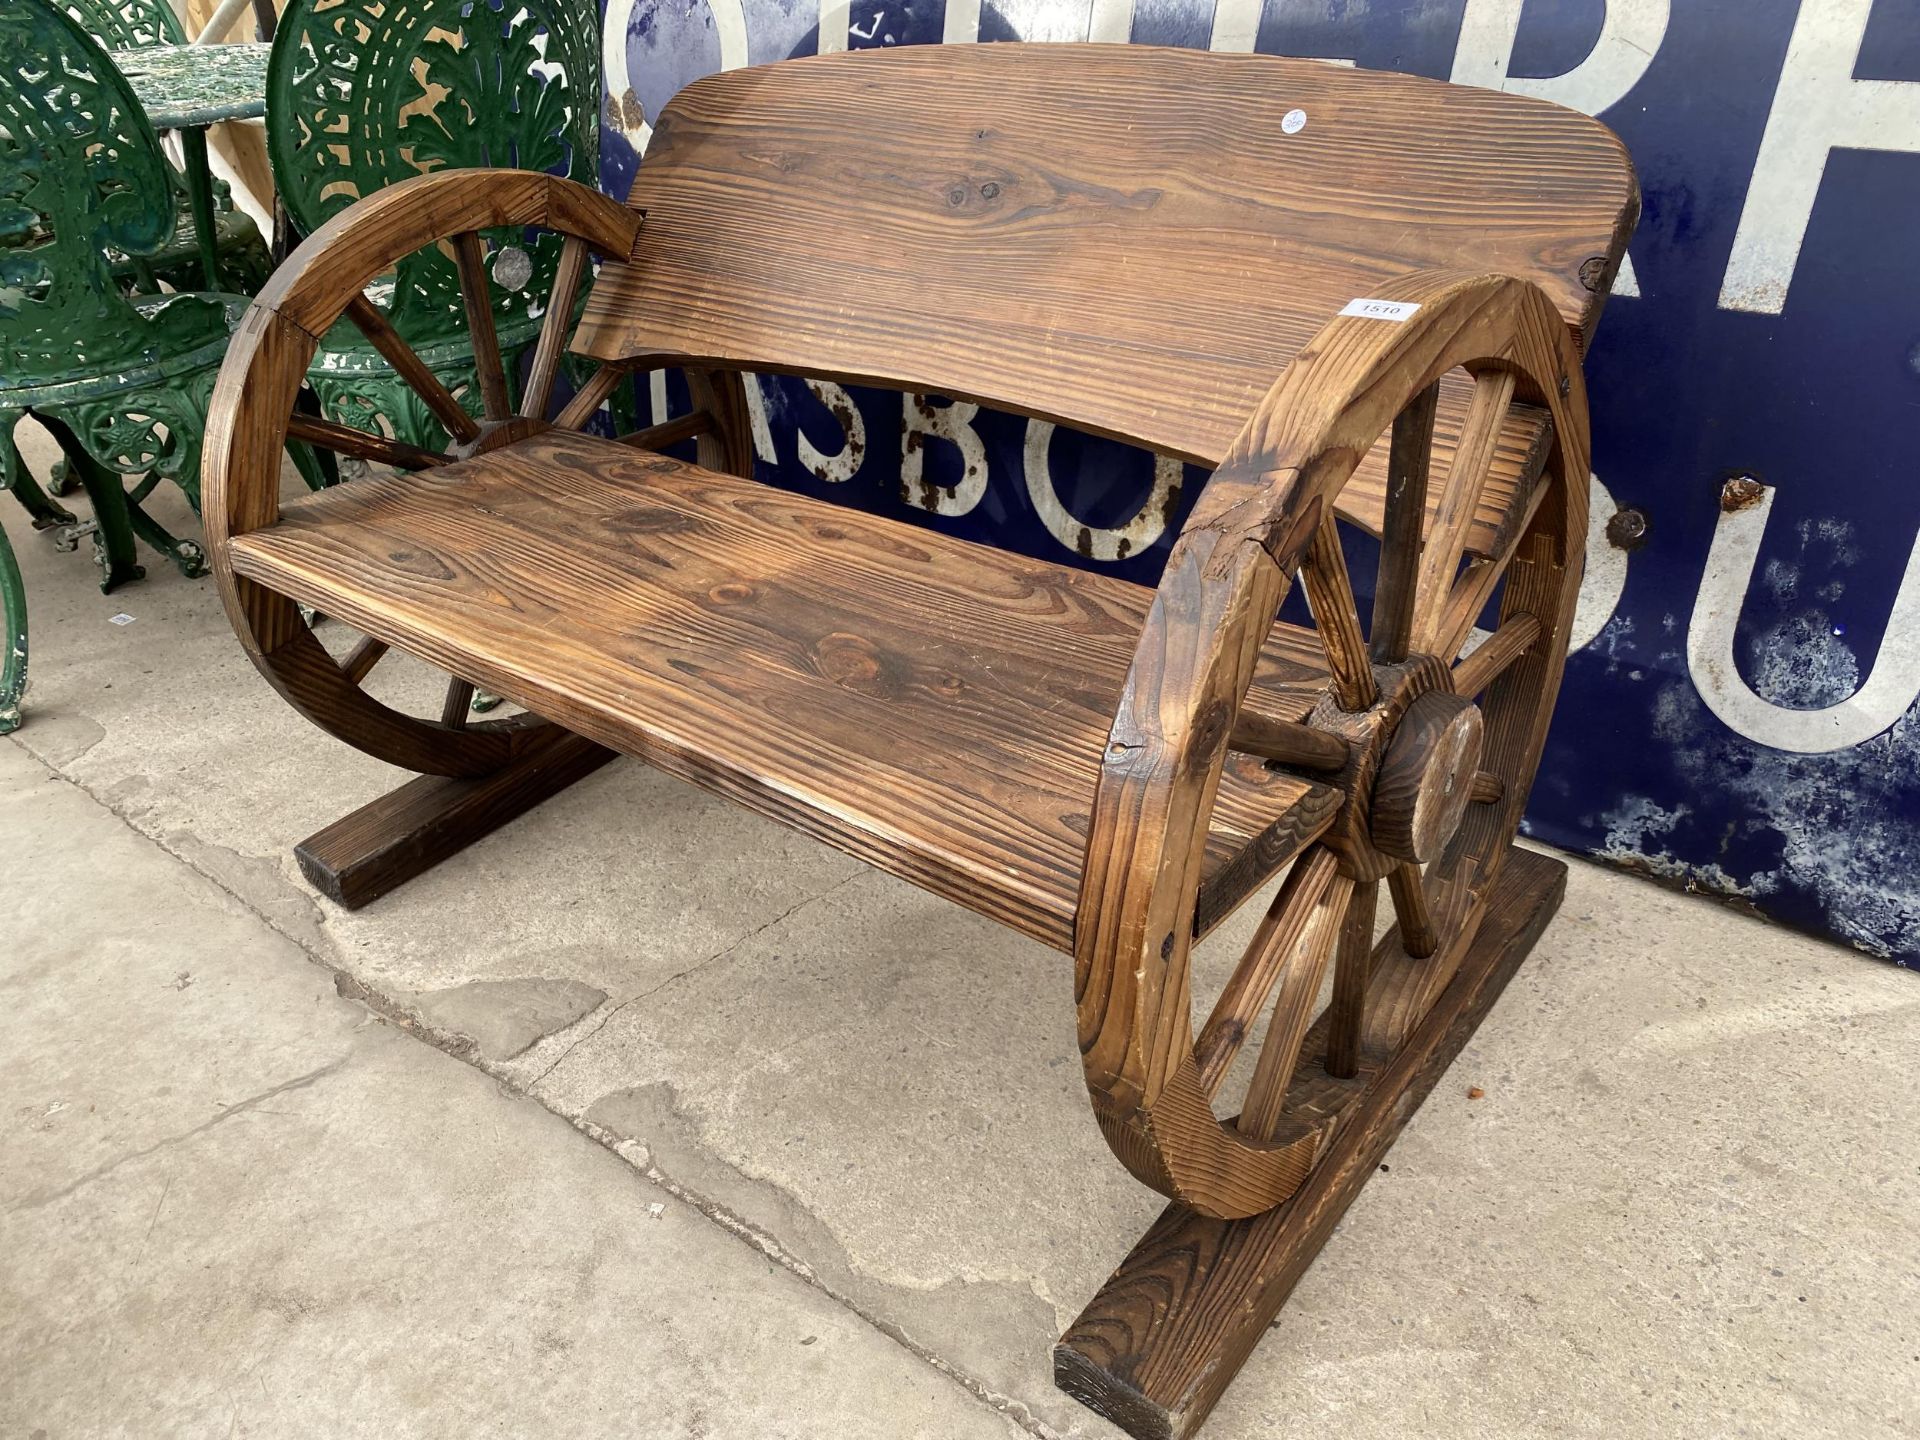 A WOODEN GARDEN TWO SEATER BENCH WITH CART WHEEL BENCH ENDS (L:98CM)